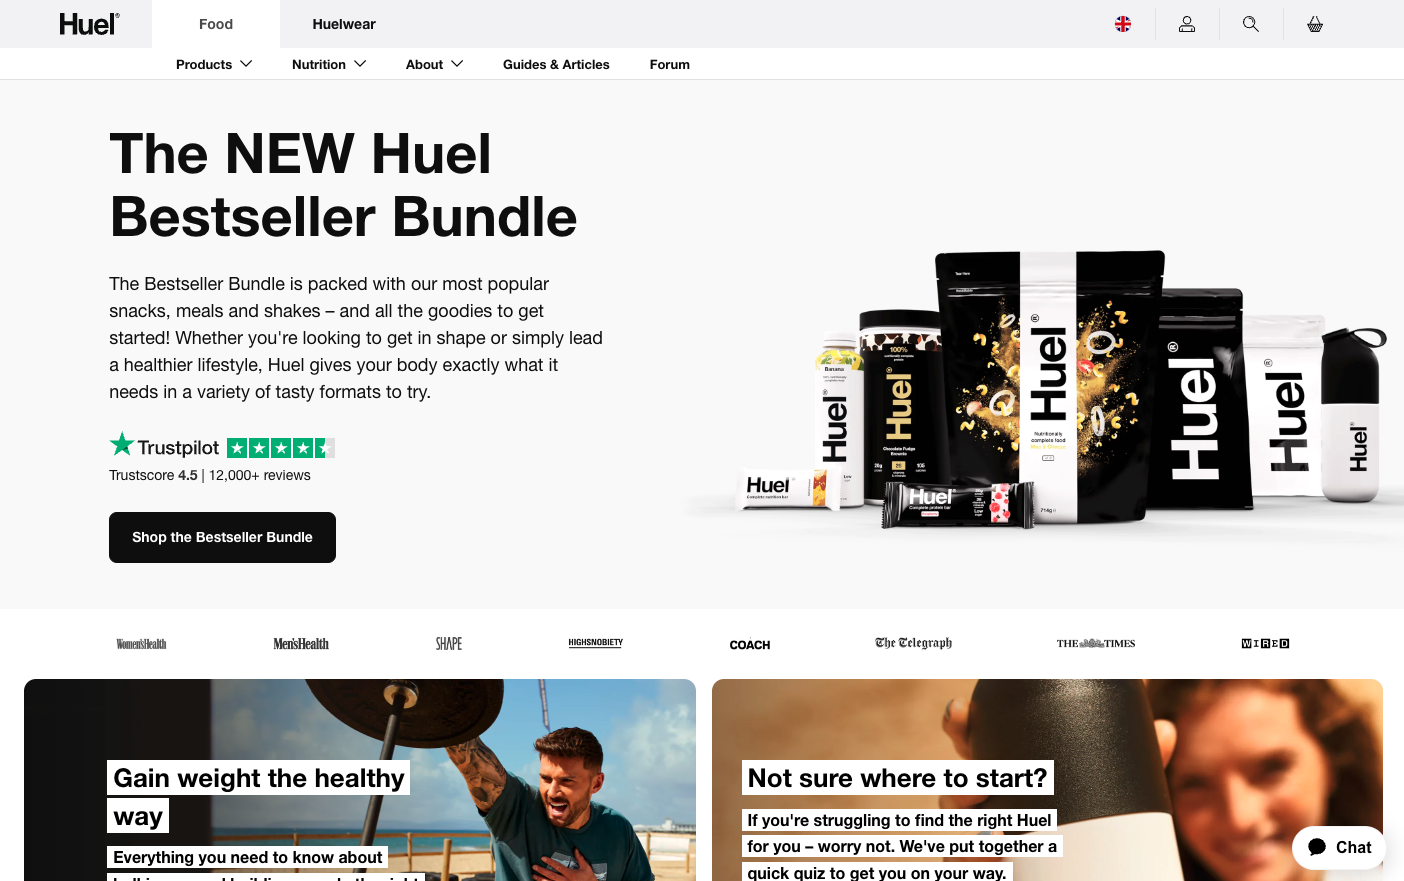 Huel's Bestseller Bundle takes centre stage with product photo on right of page and copywriting on the left.